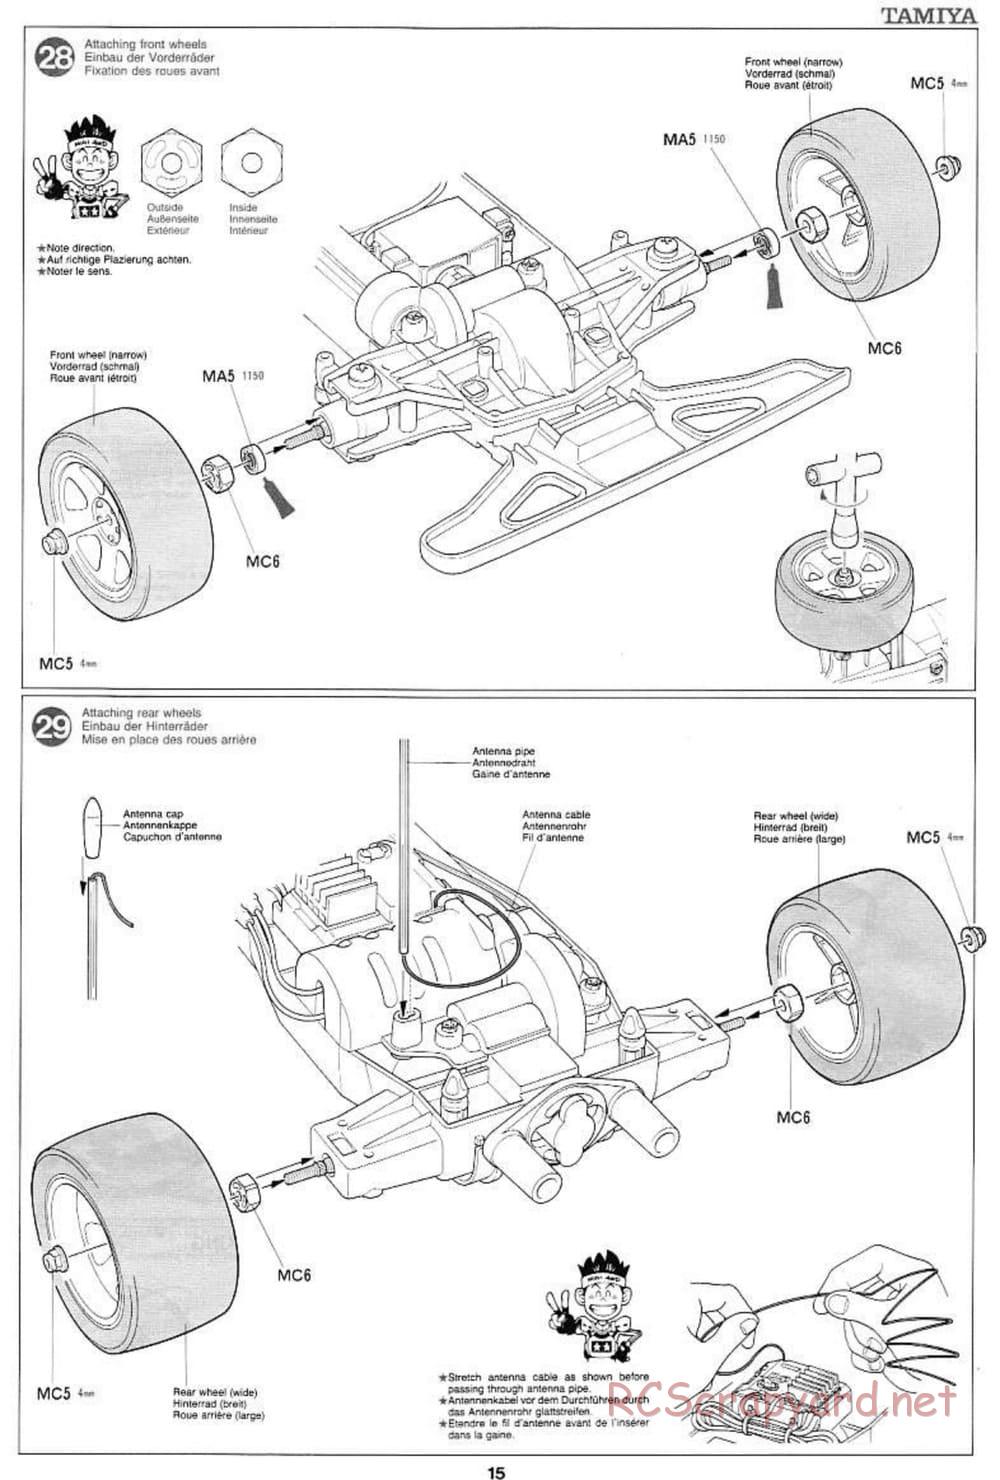 Tamiya - Voltec Fighter - Boy's 4WD Chassis - Manual - Page 15